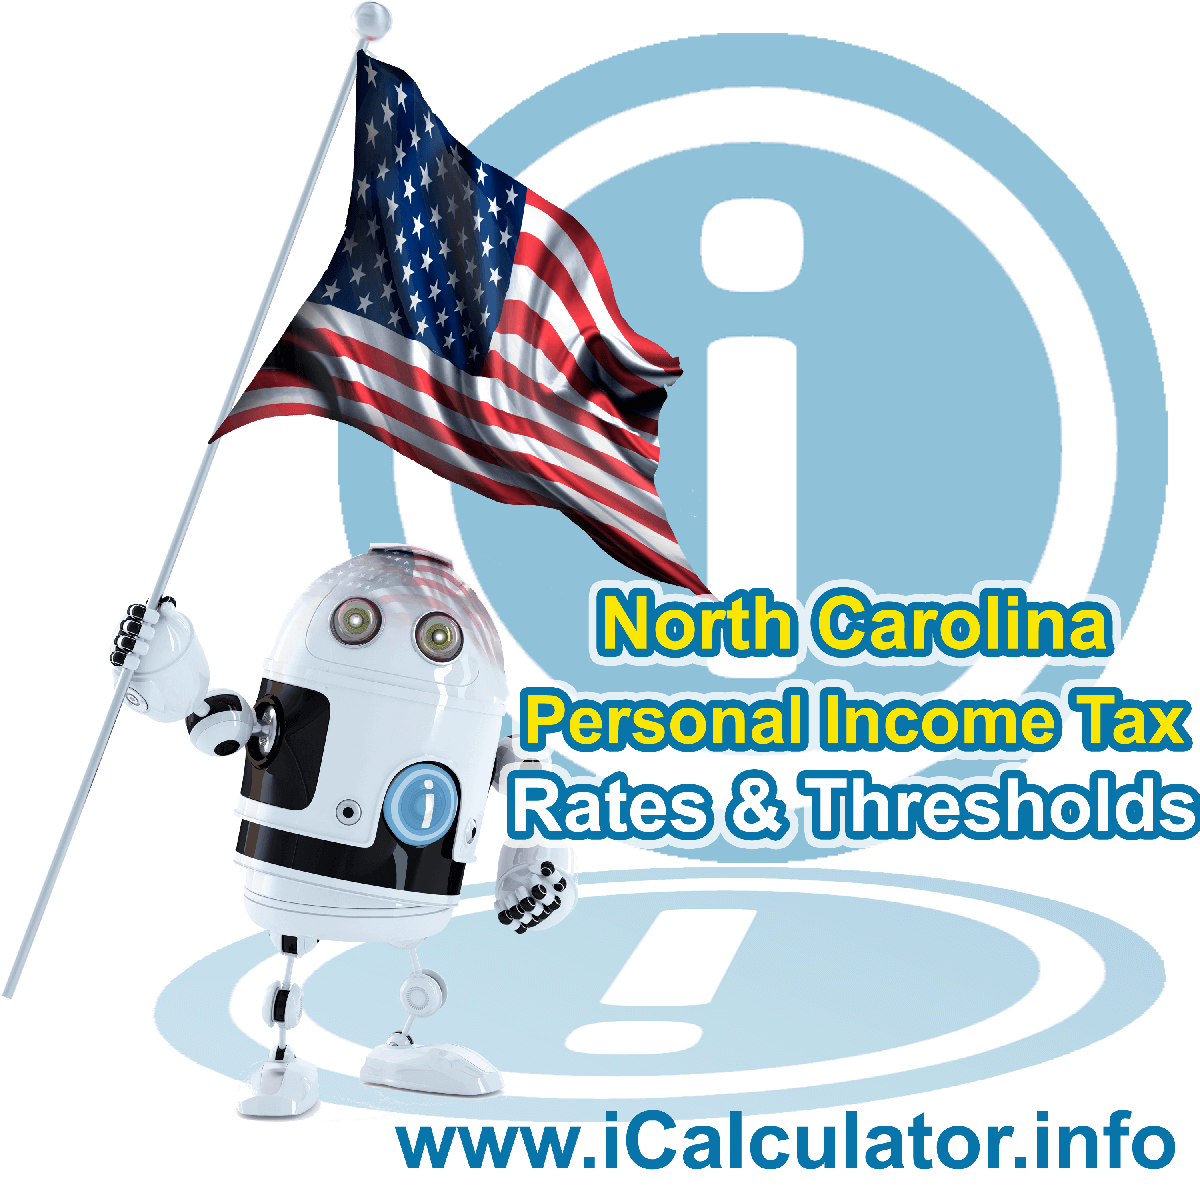 North Carolina State Tax Tables 2014. This image displays details of the North Carolina State Tax Tables for the 2014 tax return year which is provided in support of the 2014 US Tax Calculator